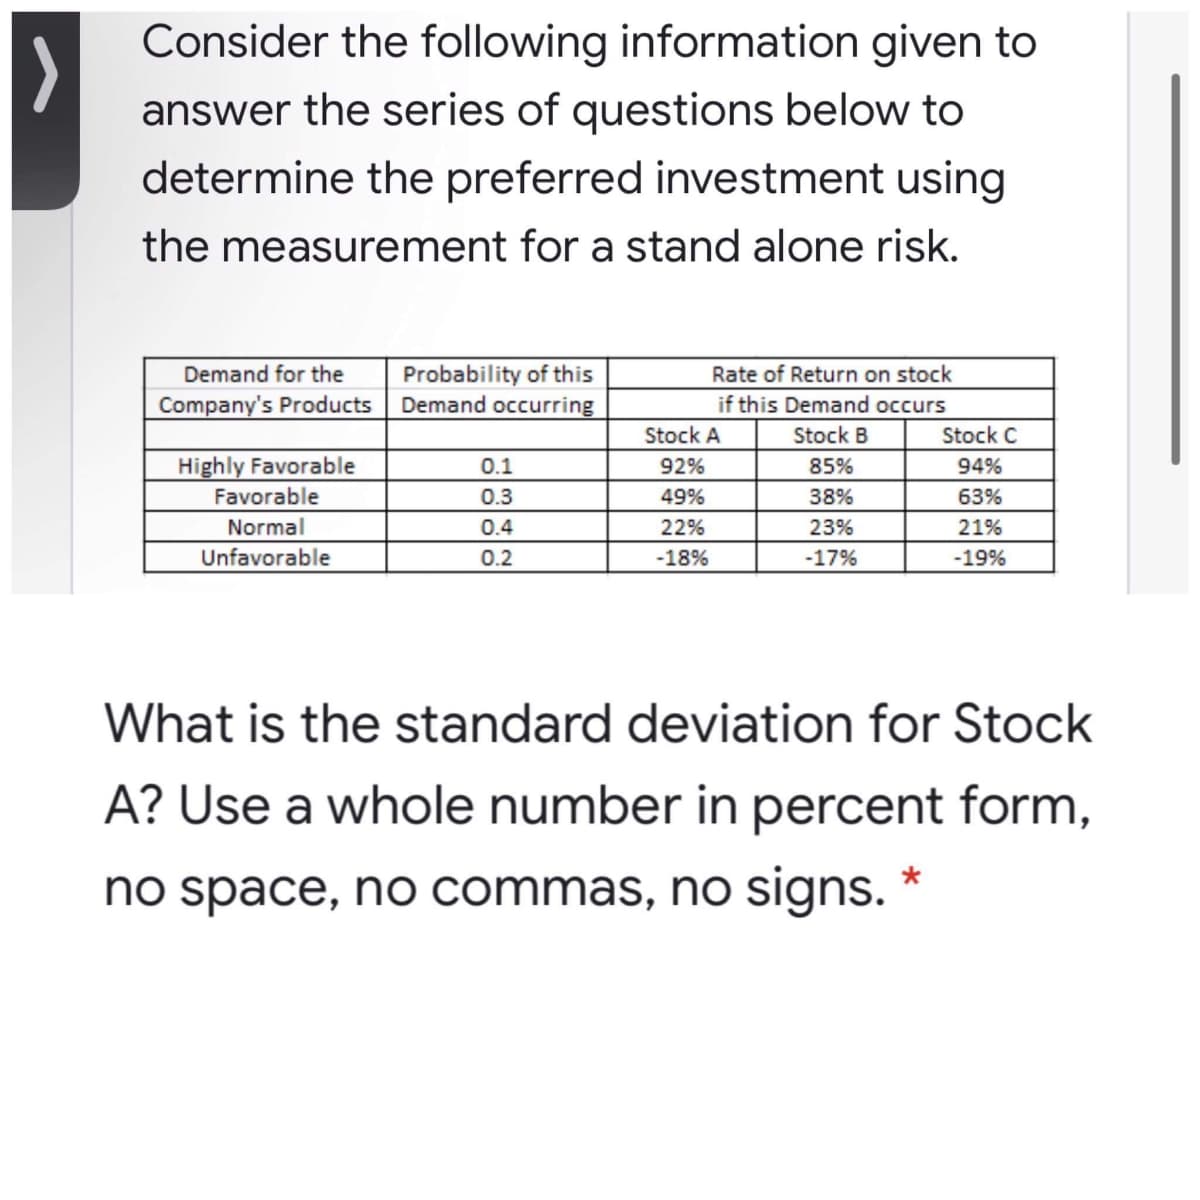 Consider the following information given to
answer the series of questions below to
determine the preferred investment using
the measurement for a stand alone risk.
Demand for the
Company's Products Demand occurring
Probability of this
Rate of Return on stock
if this Demand occurs
Stock A
Stock B
Stock C
Highly Favorable
0.1
92%
85%
94%
Favorable
0.3
49%
38%
63%
Normal
0.4
22%
23%
21%
Unfavorable
0.2
-18%
-17%
-19%
What is the standard deviation for Stock
A? Use a whole number in percent form,
no space, no commas, no signs. *
